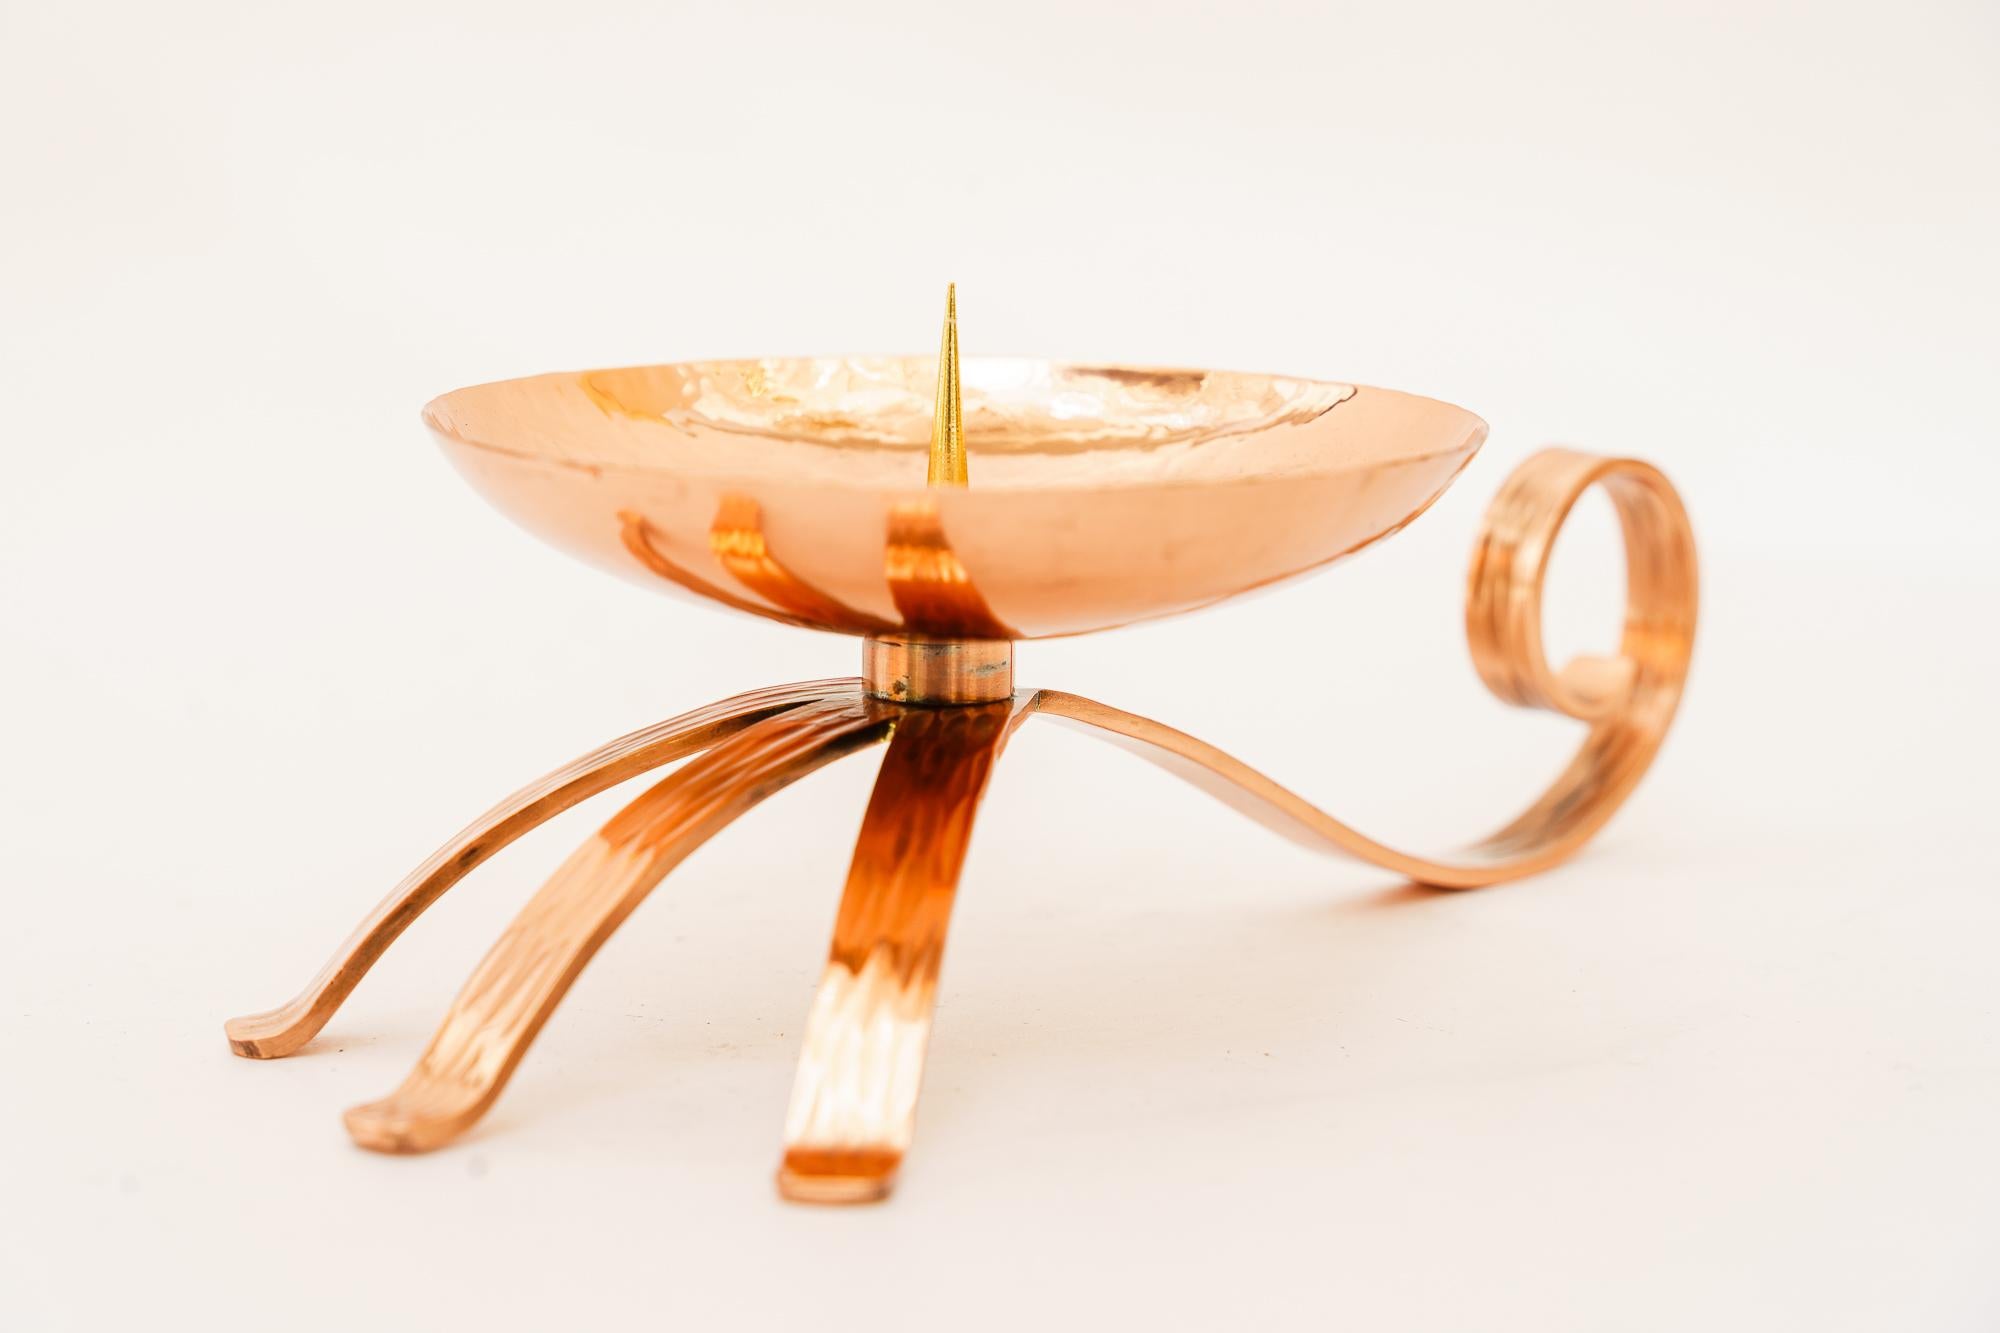 Portable copper Candle Holder for Wine Cellars vienna around 1950s
Polished and stove enameled